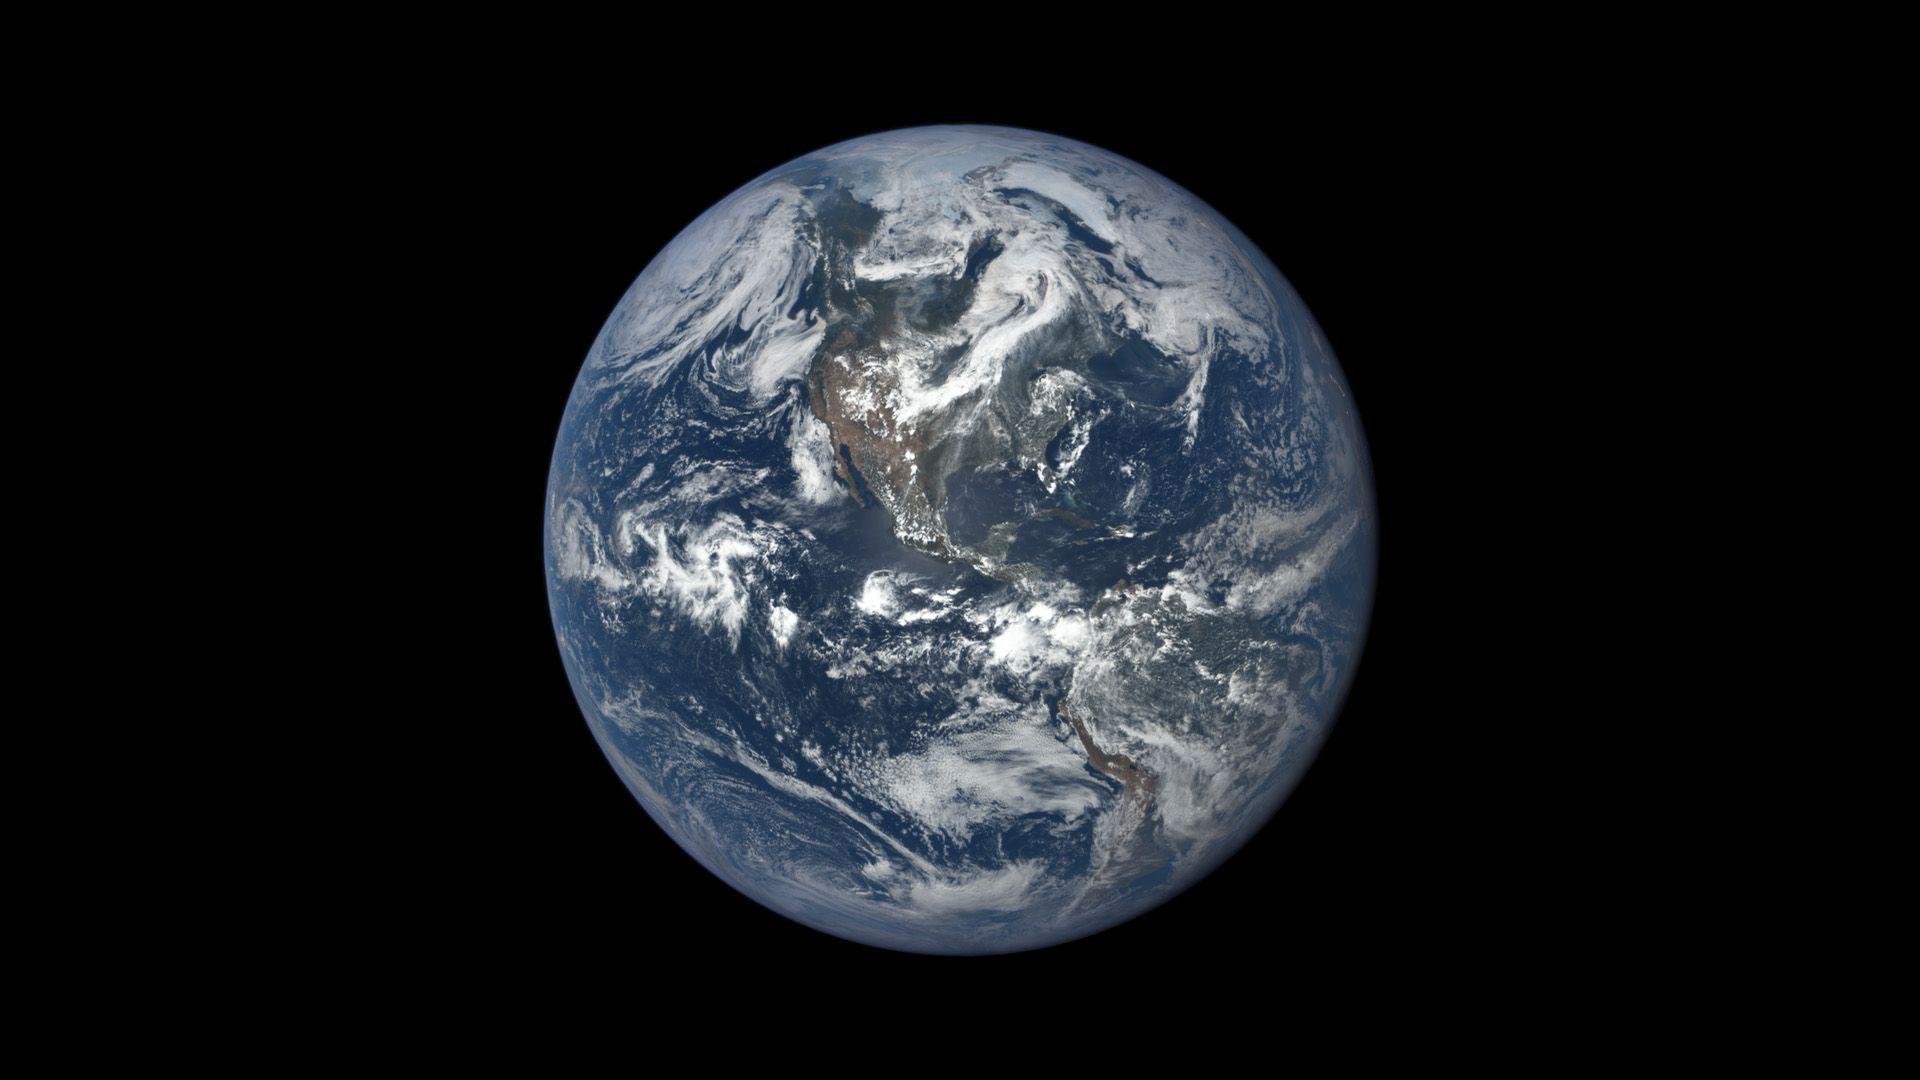 New NASA Image Shows Stunning Distance of Earth and Moon